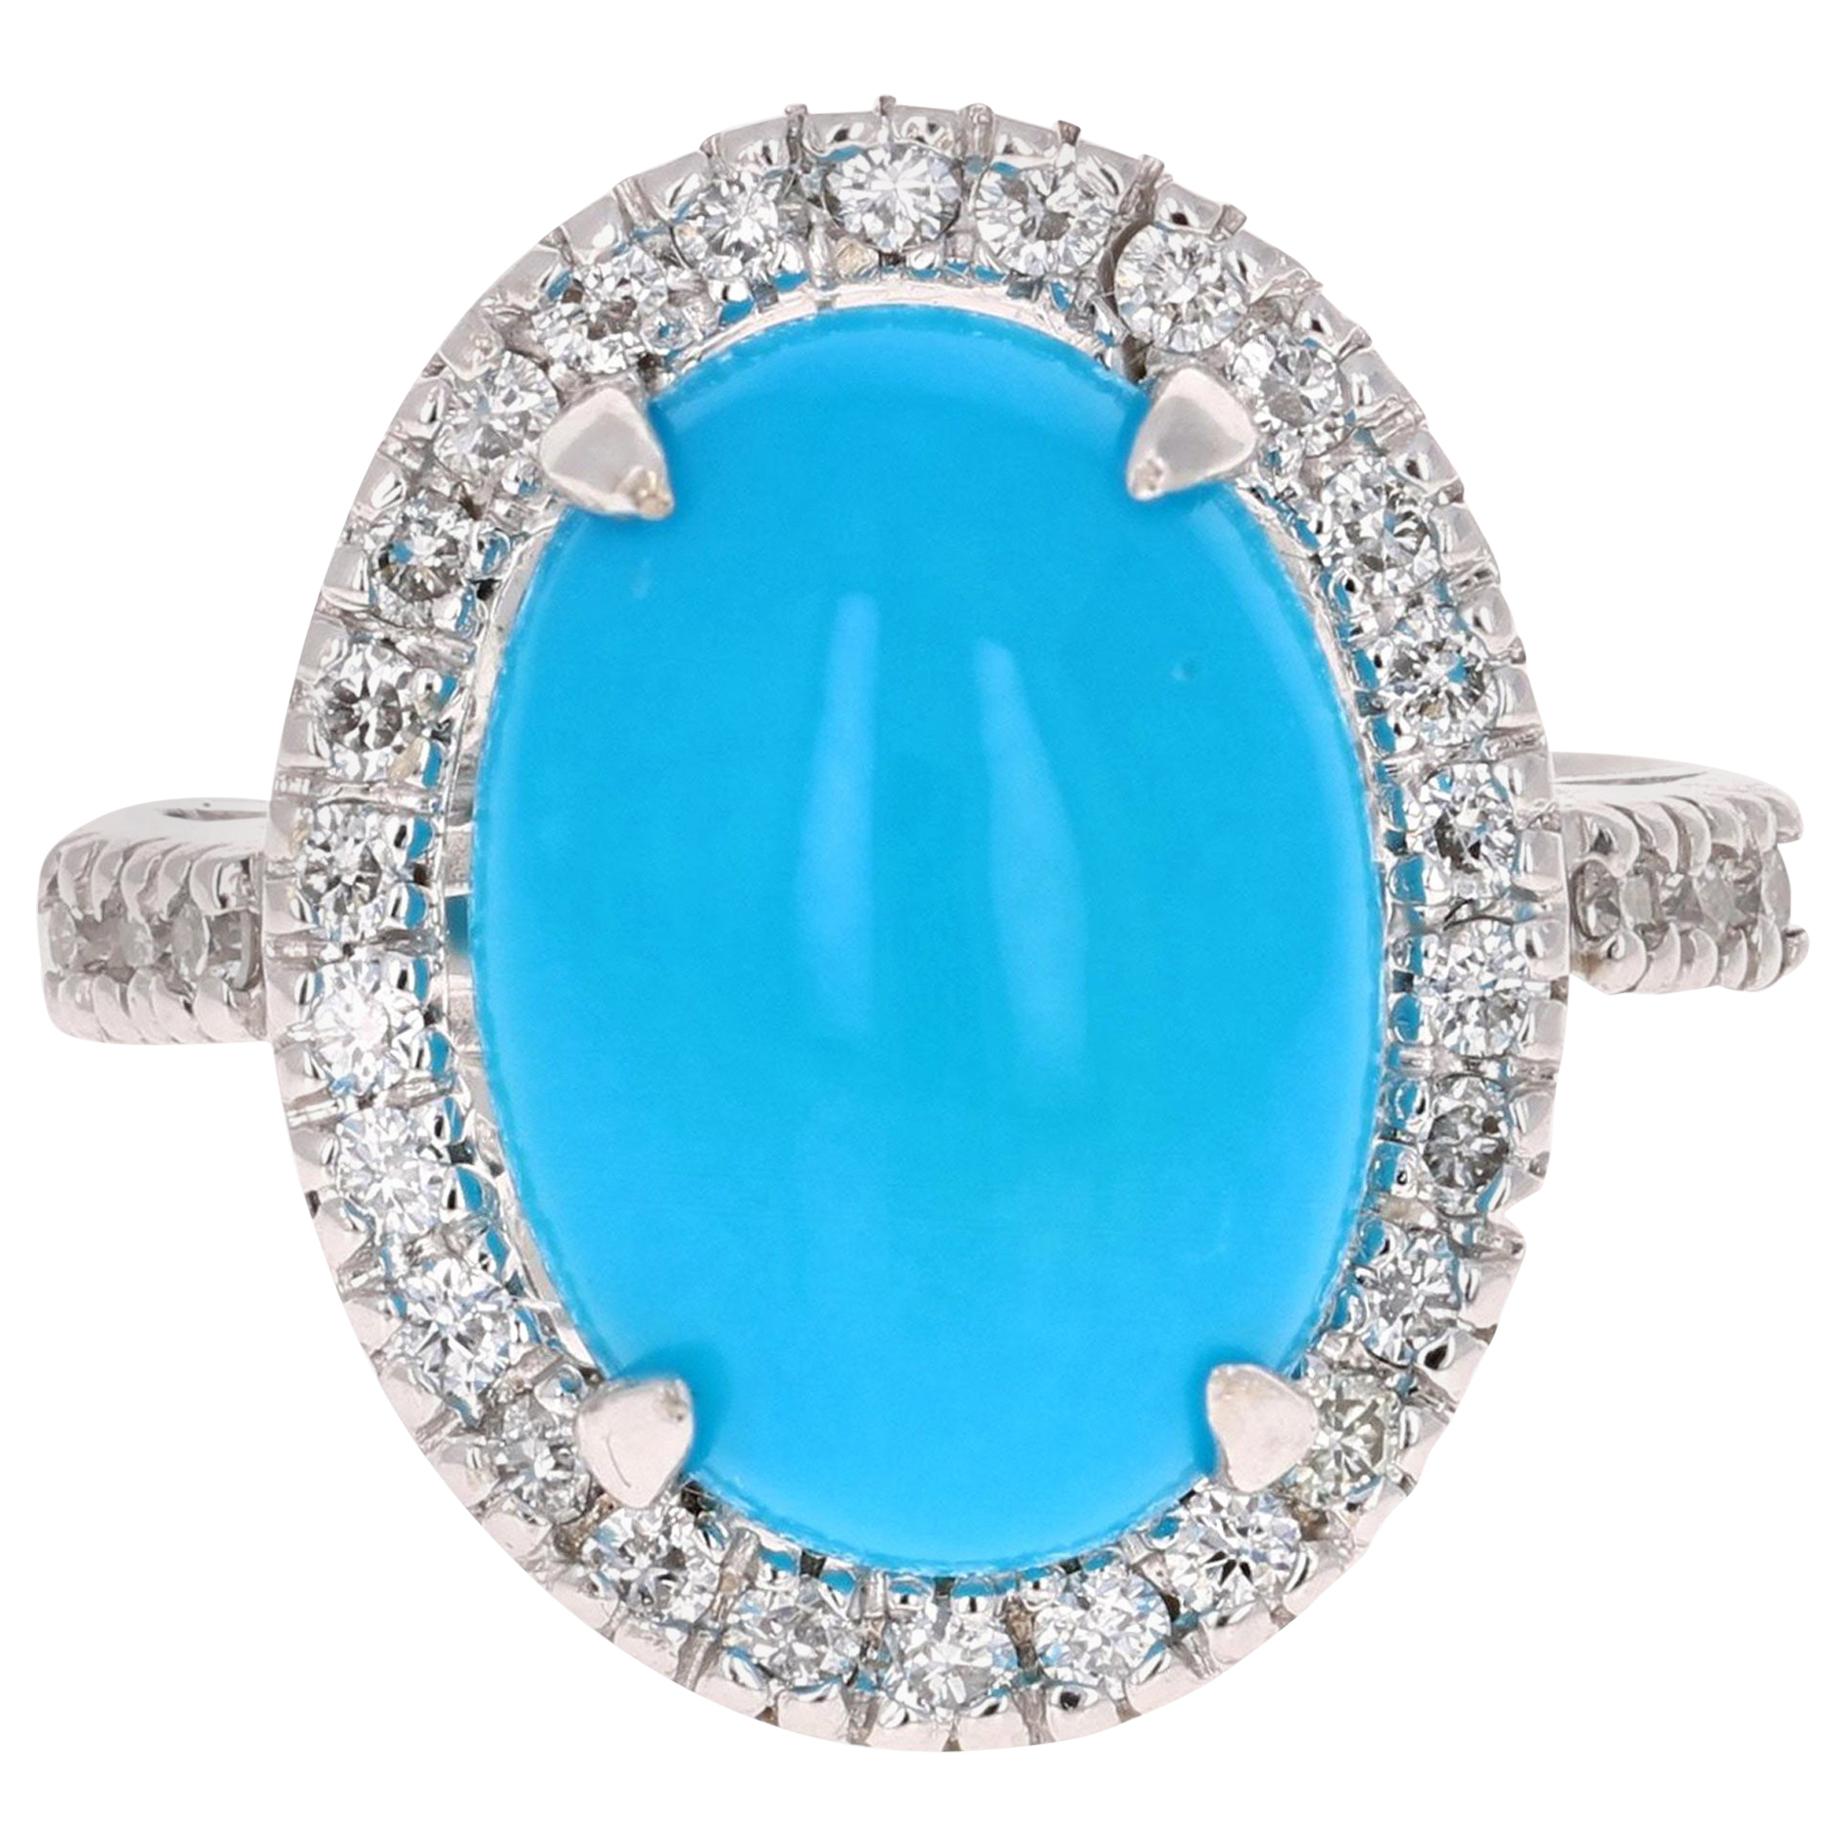 5.26 Carat Oval Cut Turquoise Diamond White Gold Fashion Ring For Sale